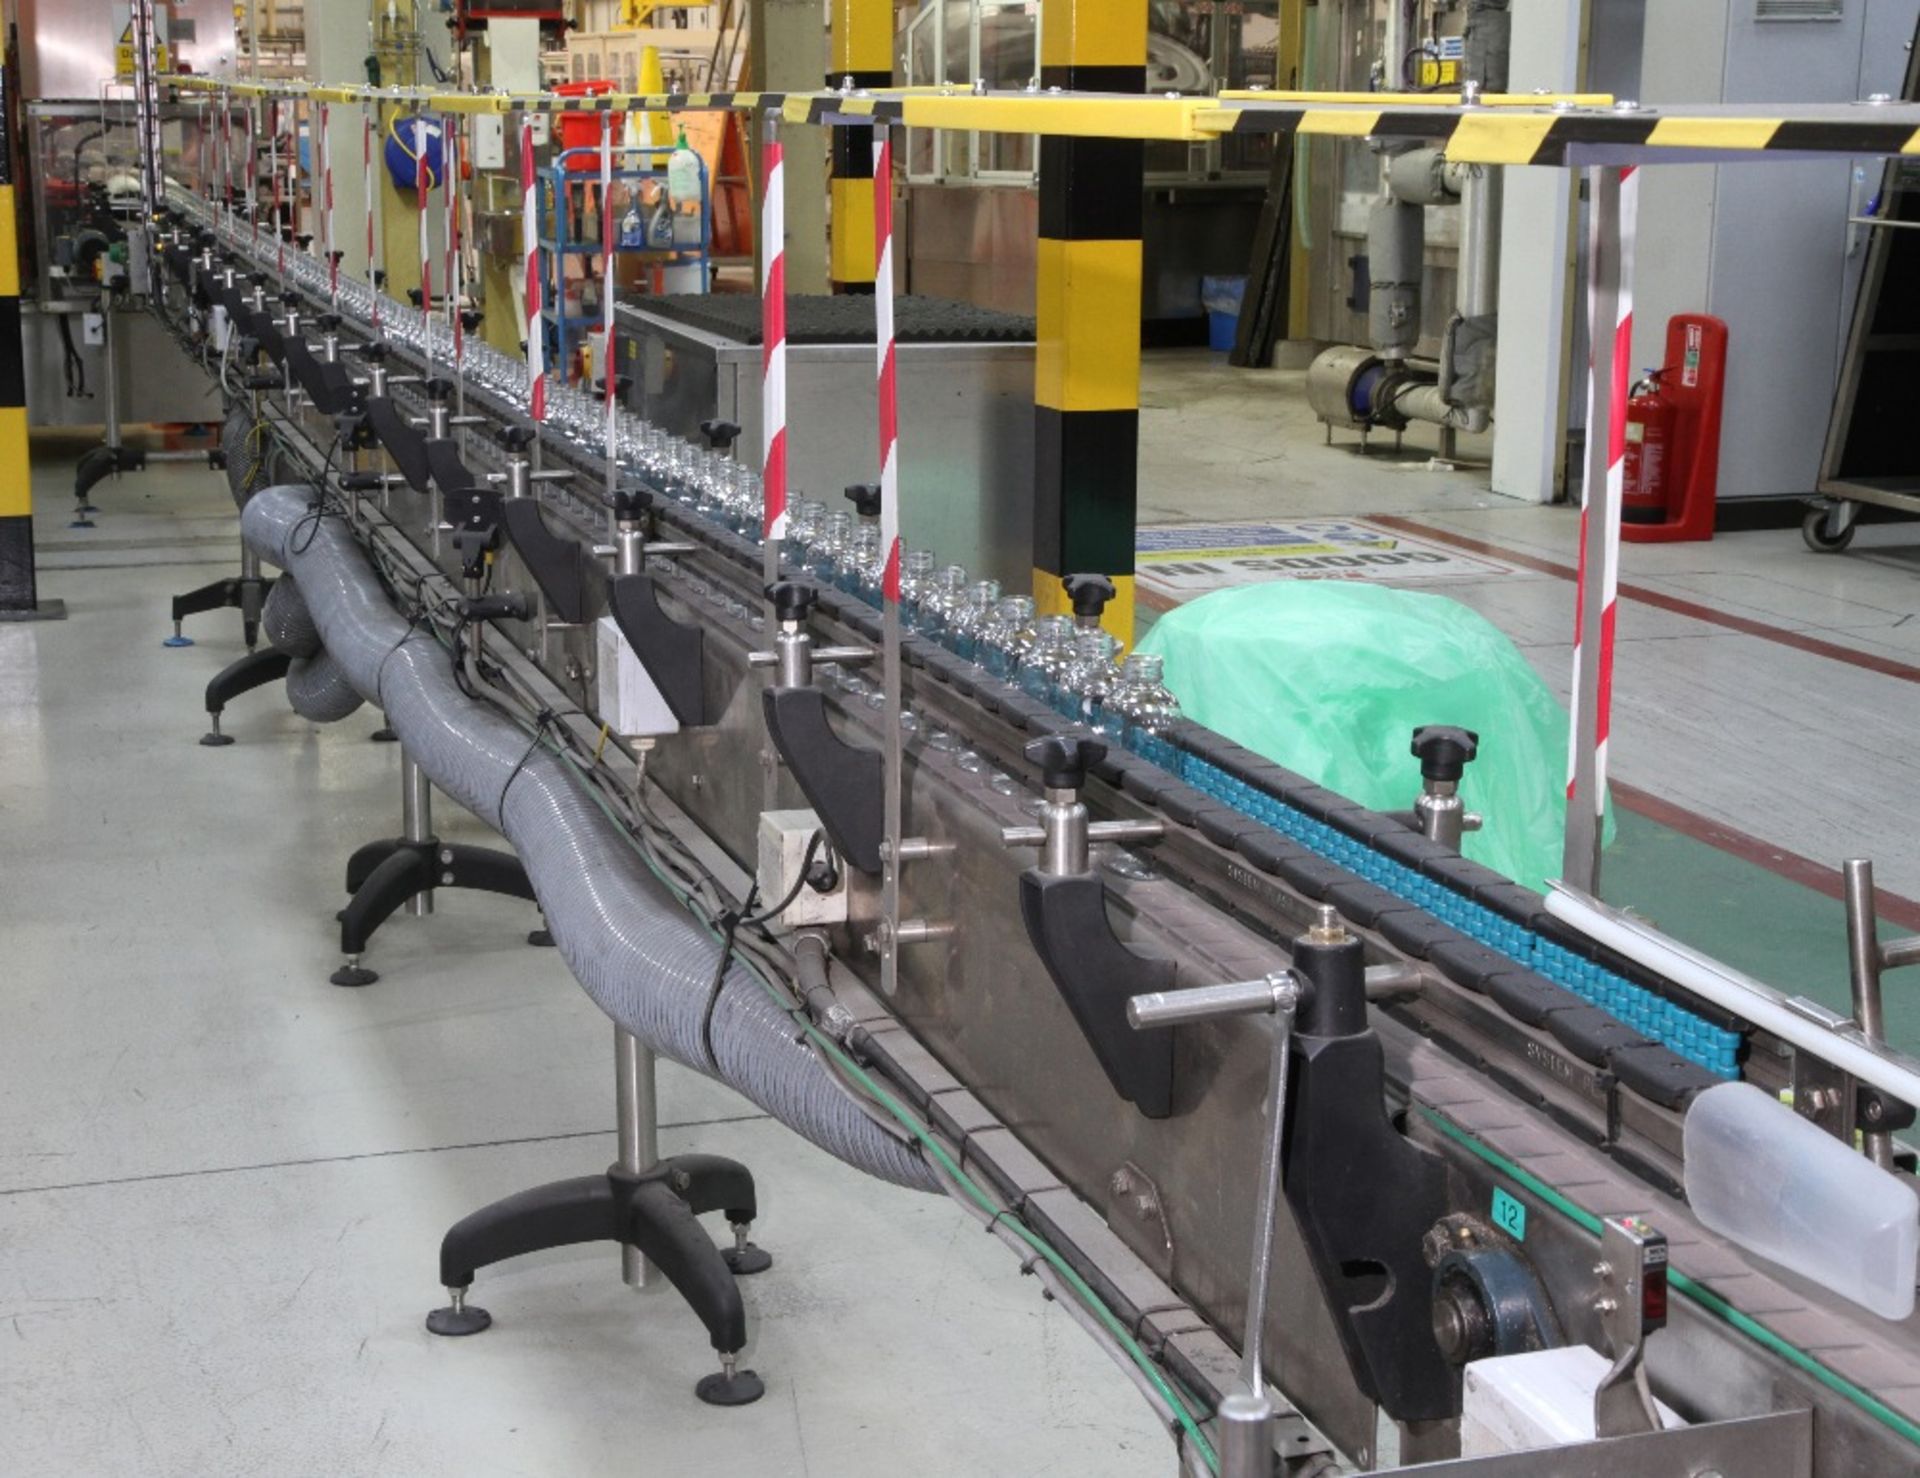 Contents Of World Class Manufacturer's Bottling Line. - Image 8 of 87